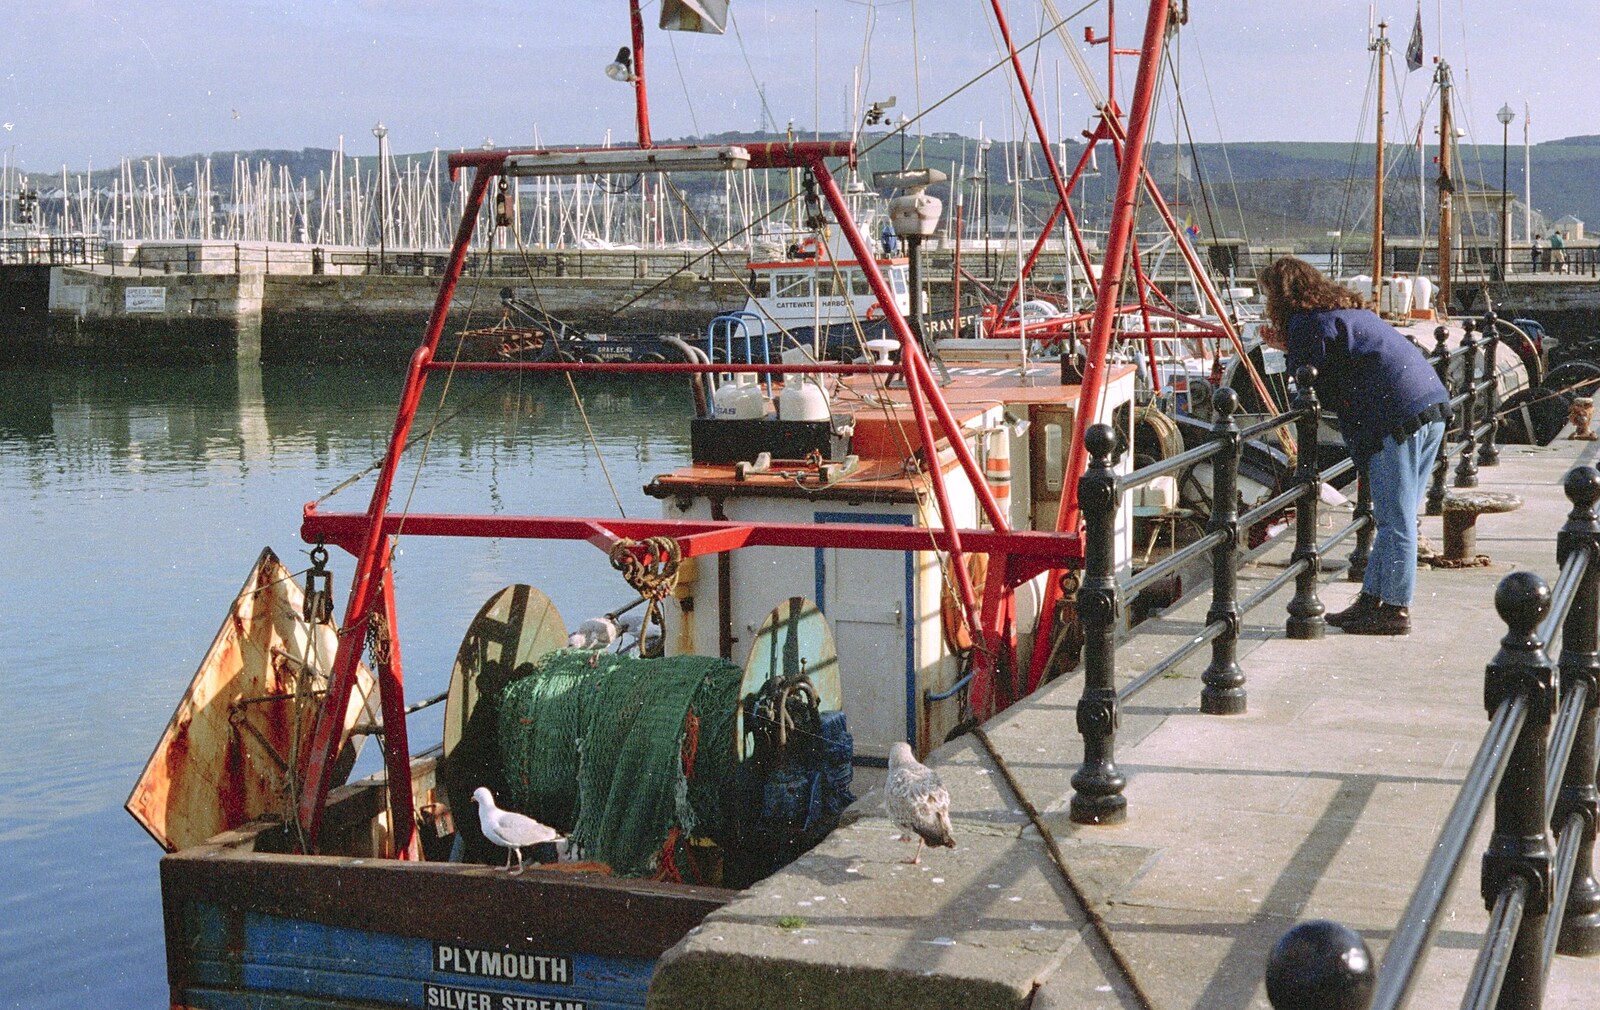 Vicky looks at fishing boats from Uni: A CISU Trip To Plymouth, Devon - 16th March 1996